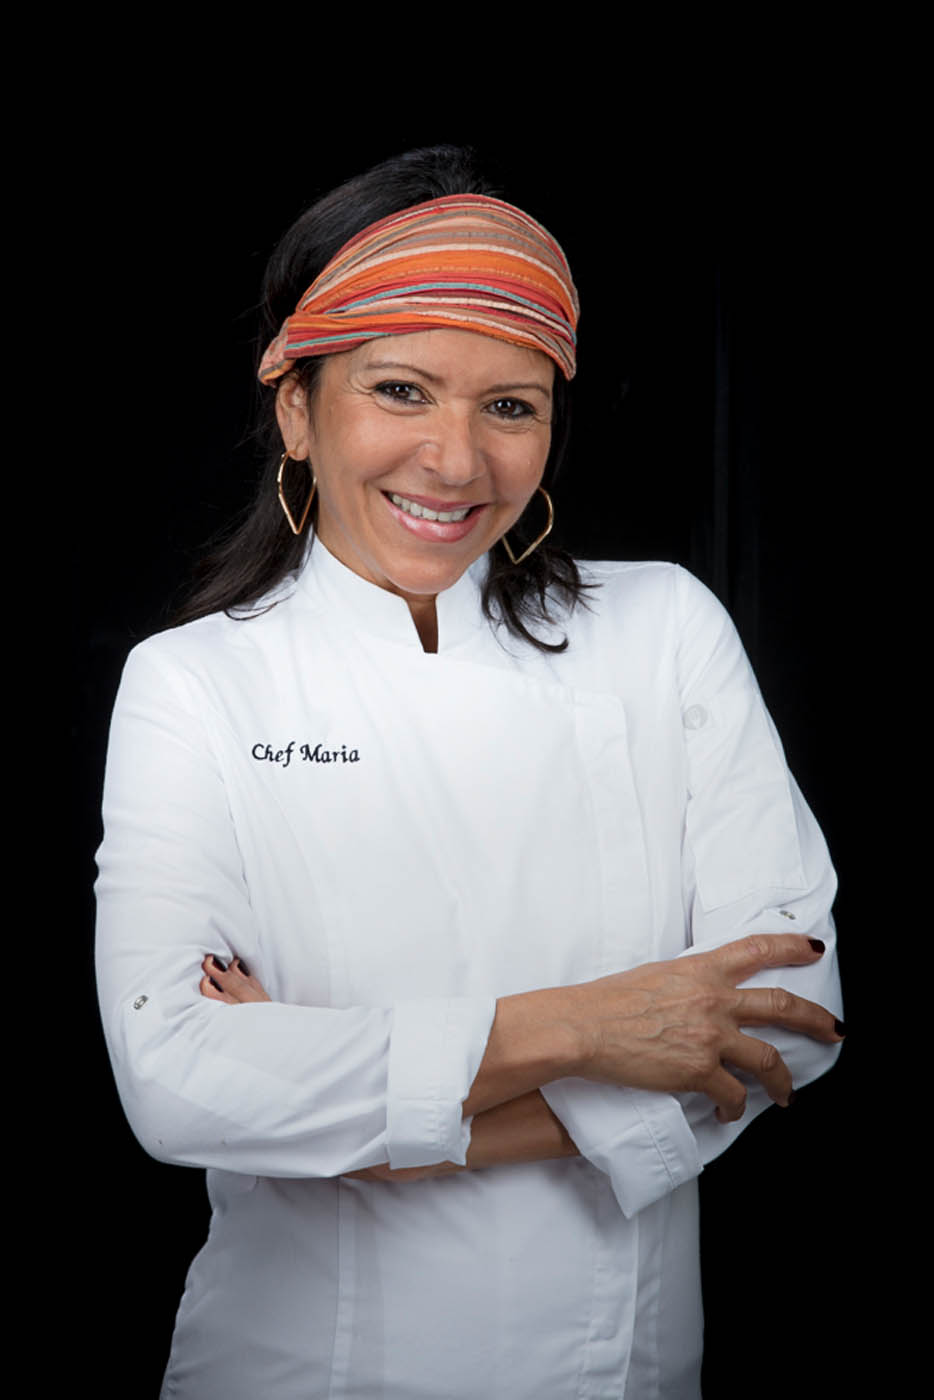 The Real Food Academy Chef Maria.